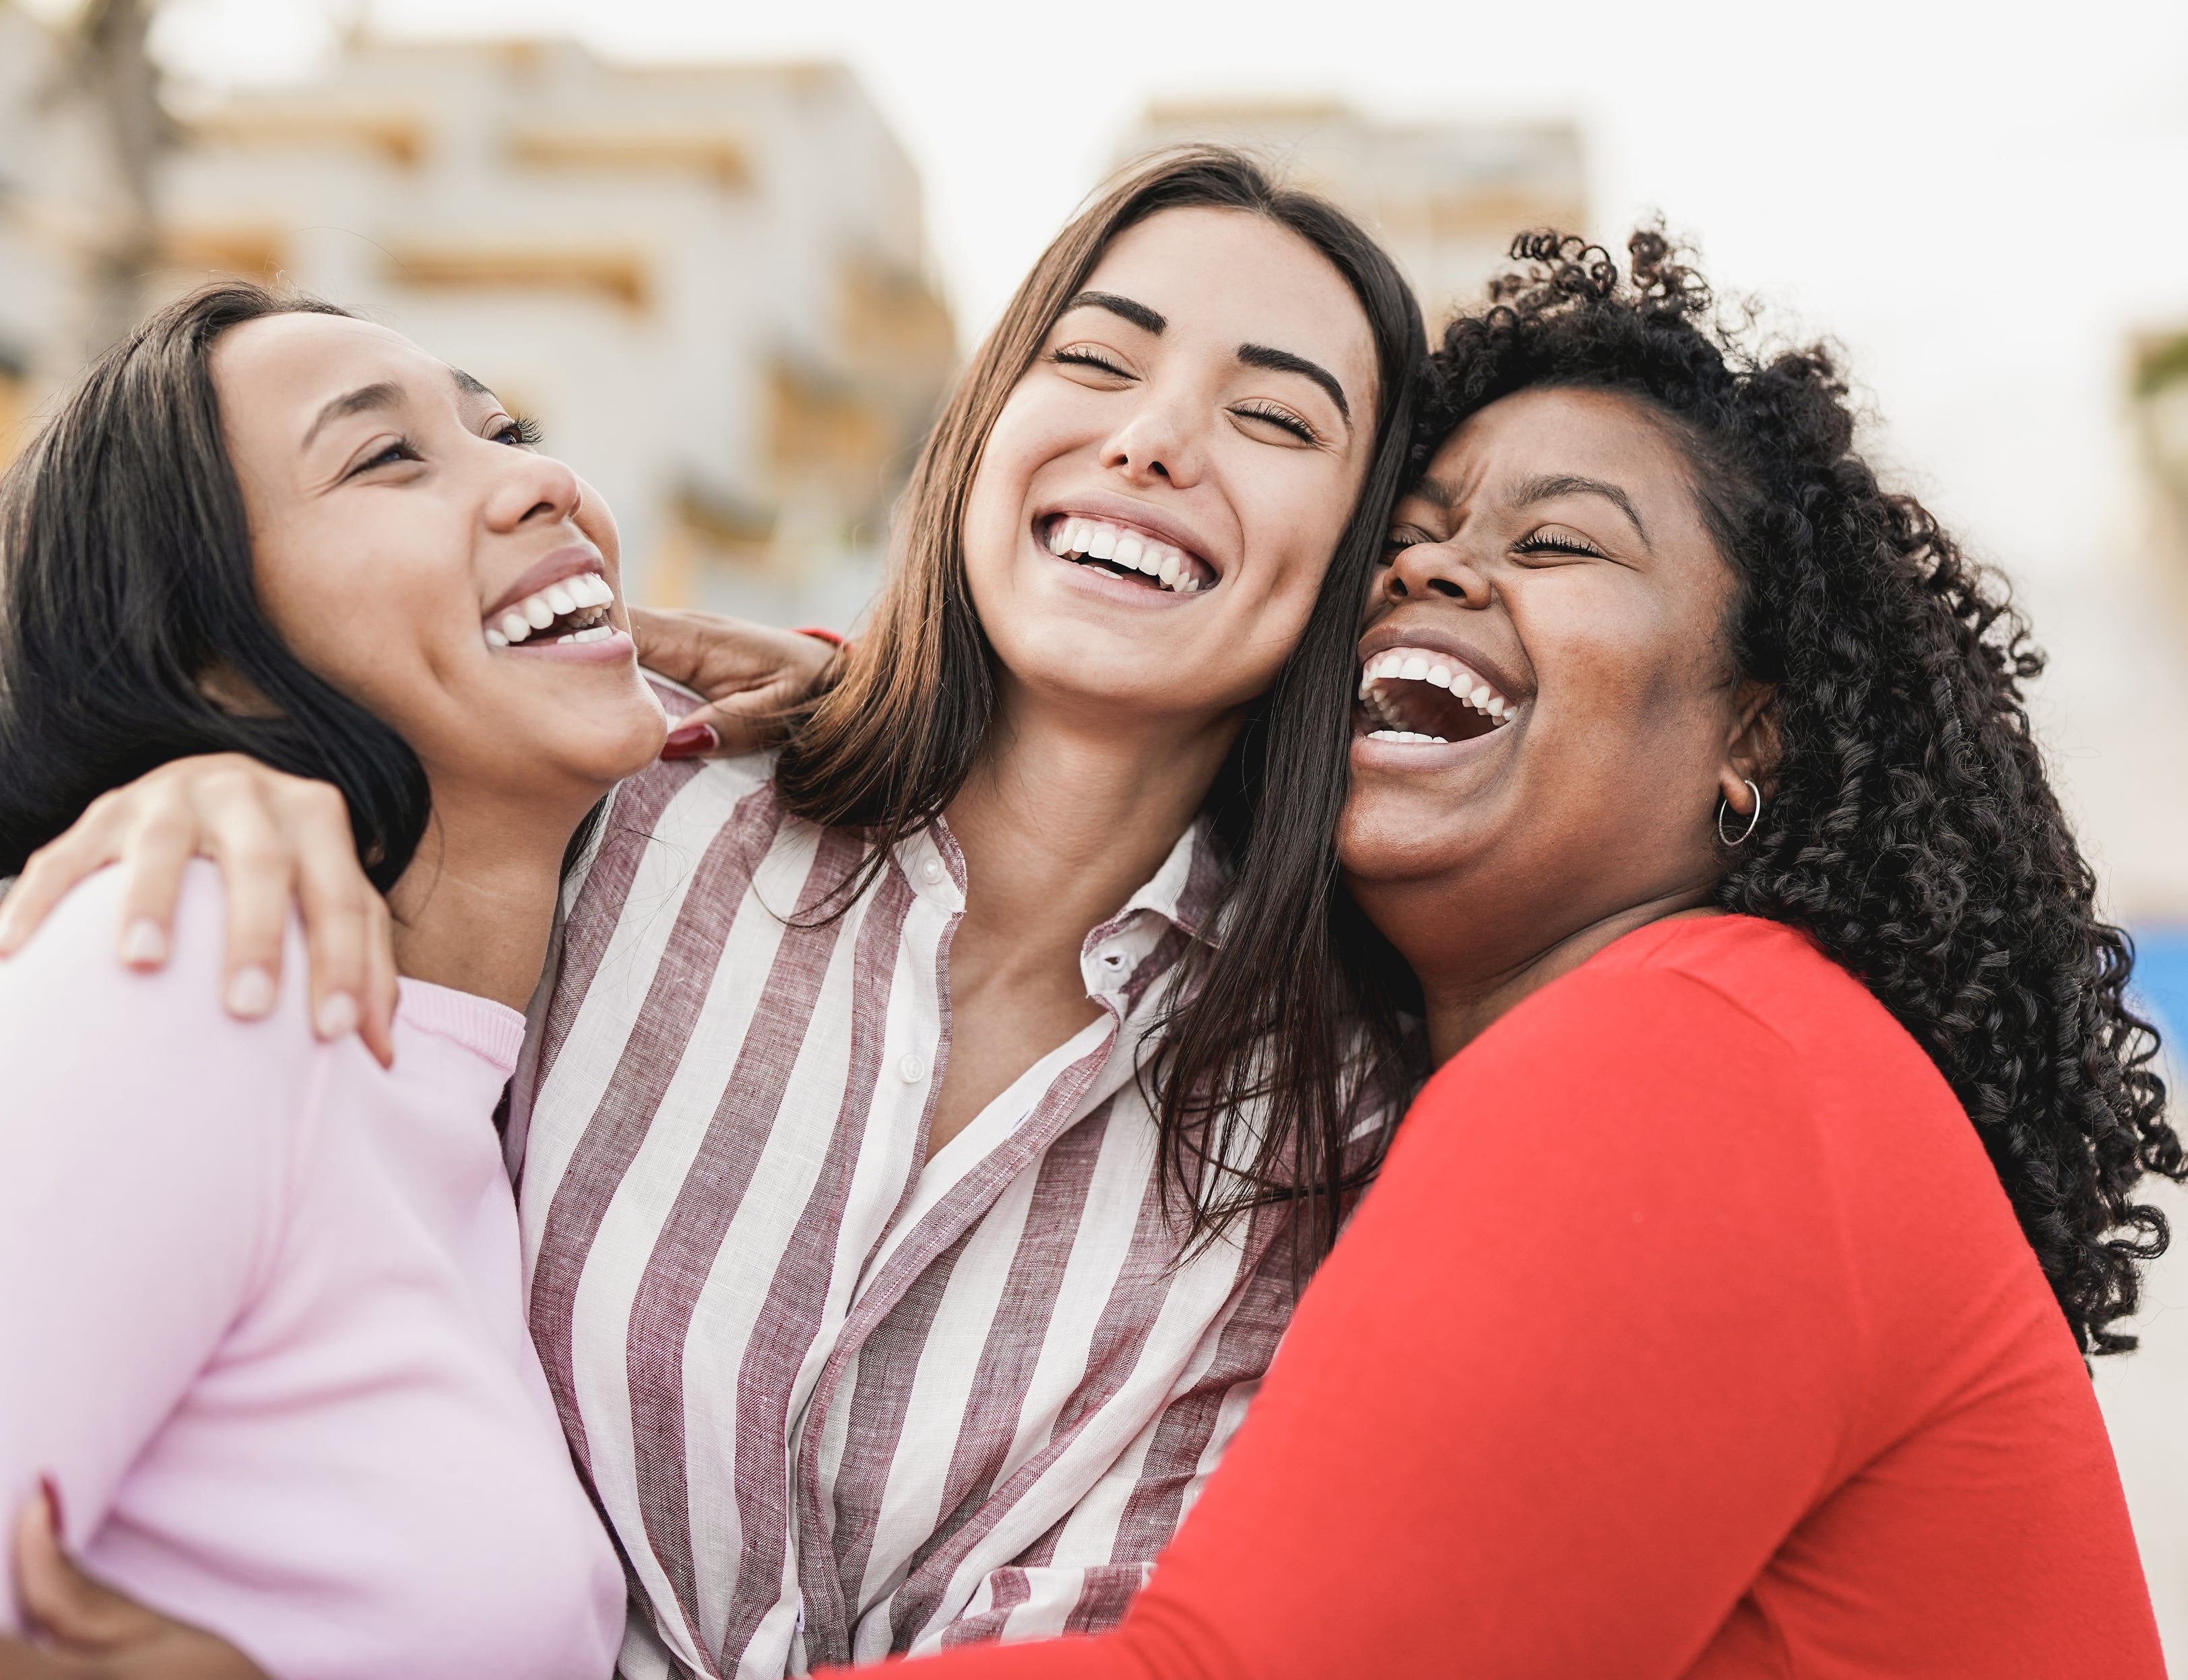 Three women are clutched in an embrace as they laugh.